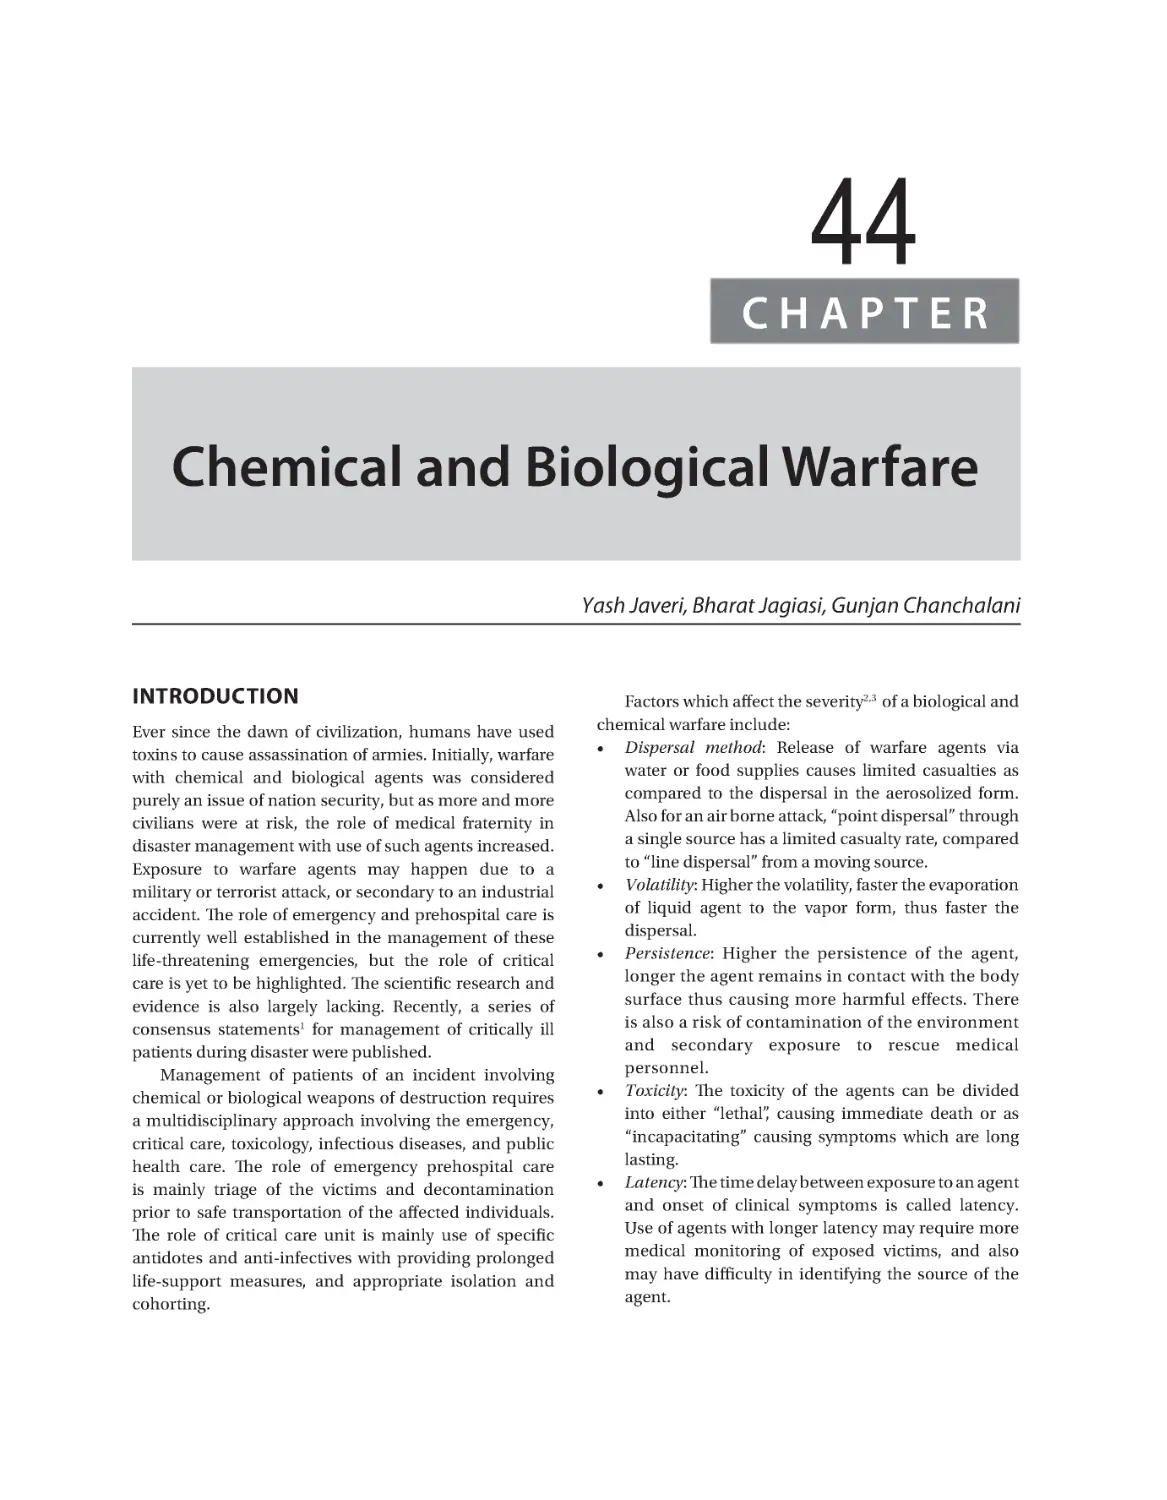 Chapter 44: Chemical and Biological Warfare